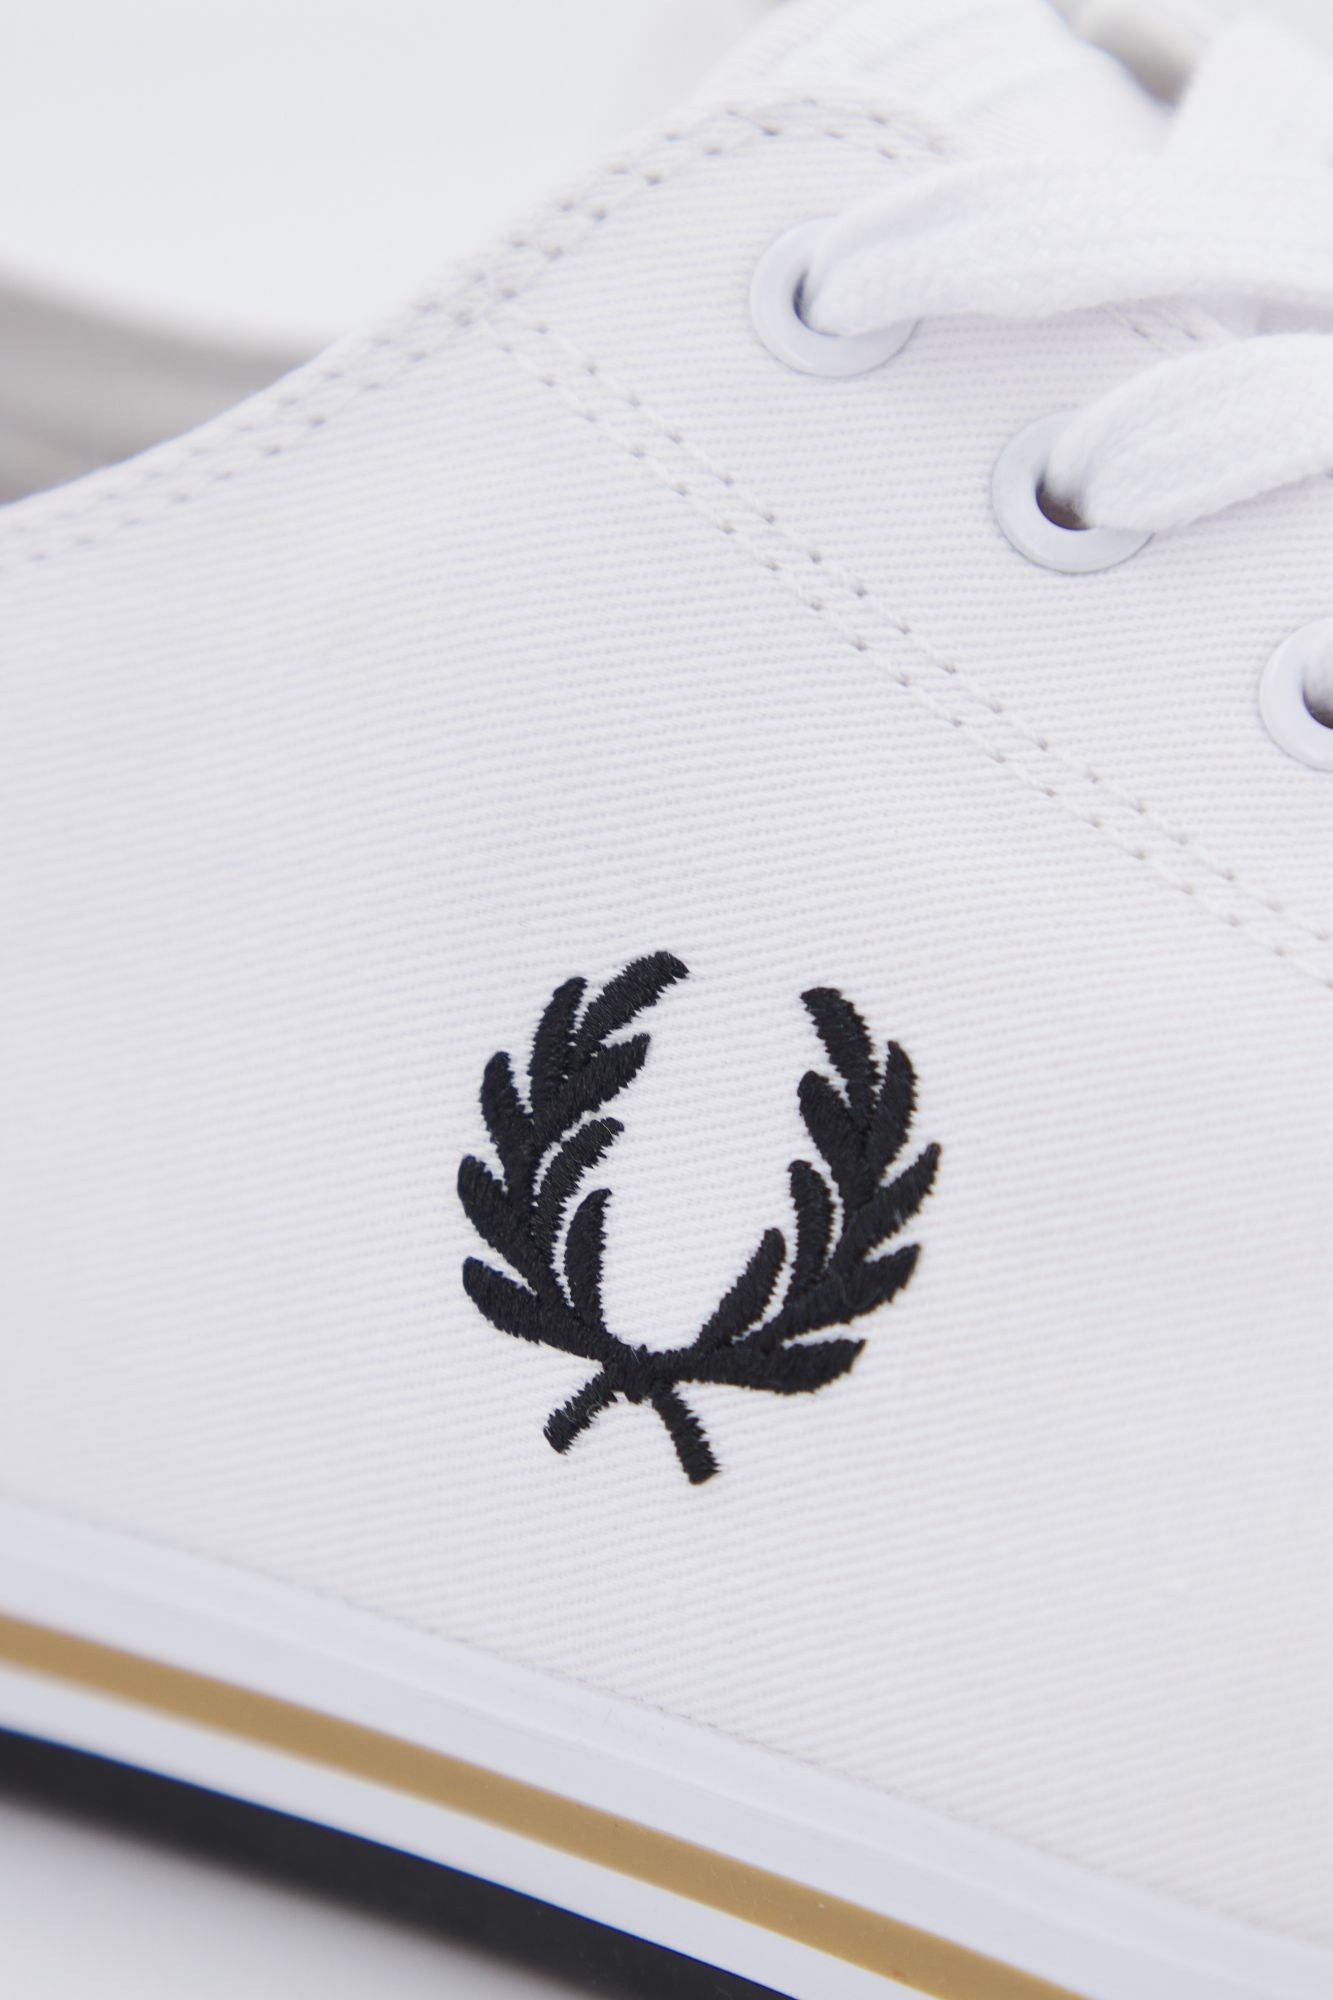 FRED PERRY KINGSTON TWILL en color BLANCO (4)